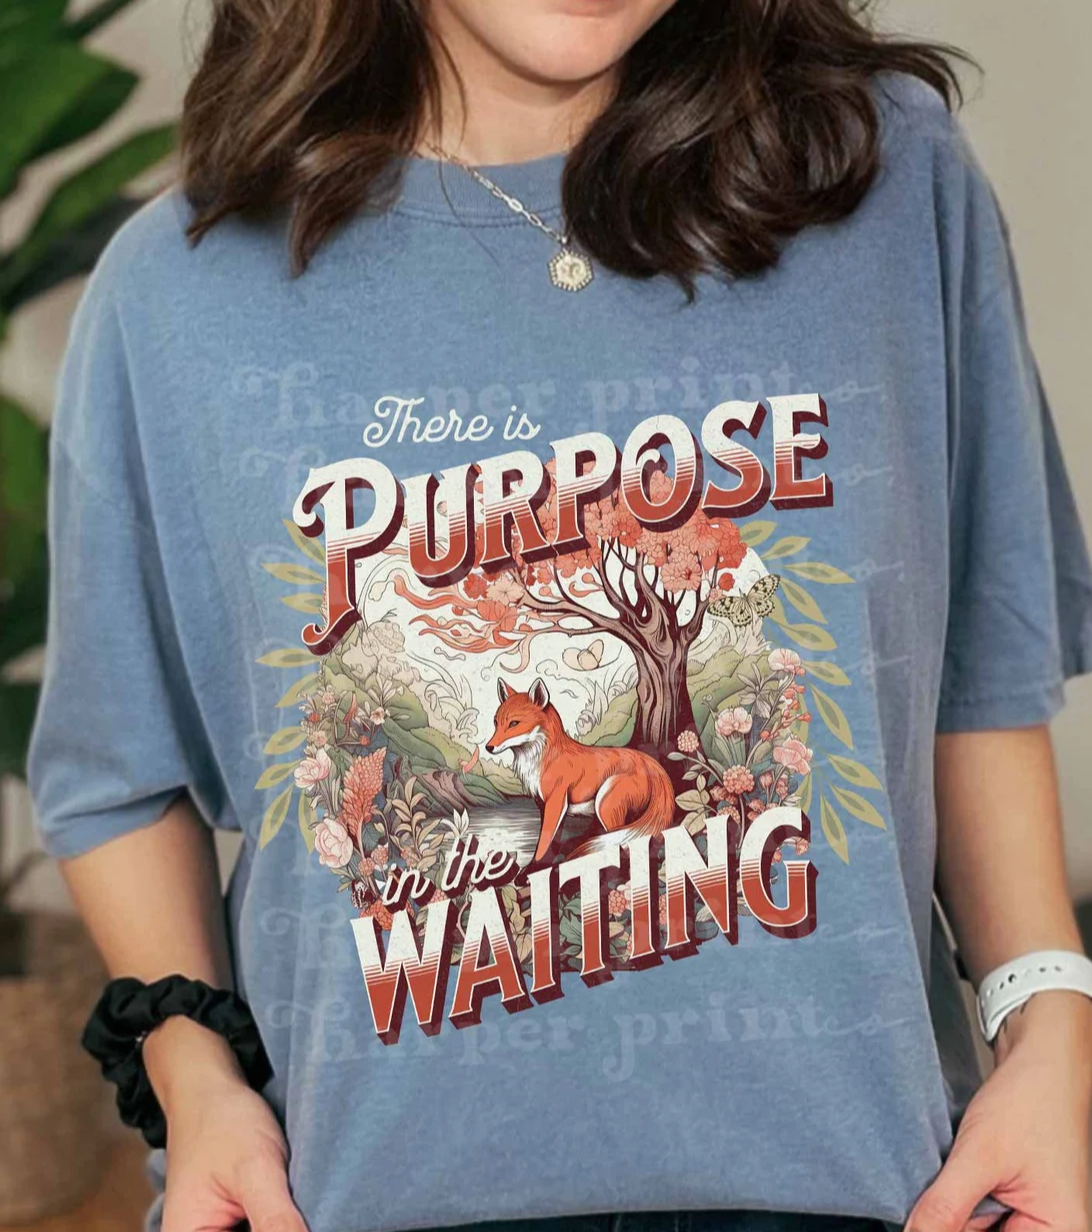 Purpose in the waiting